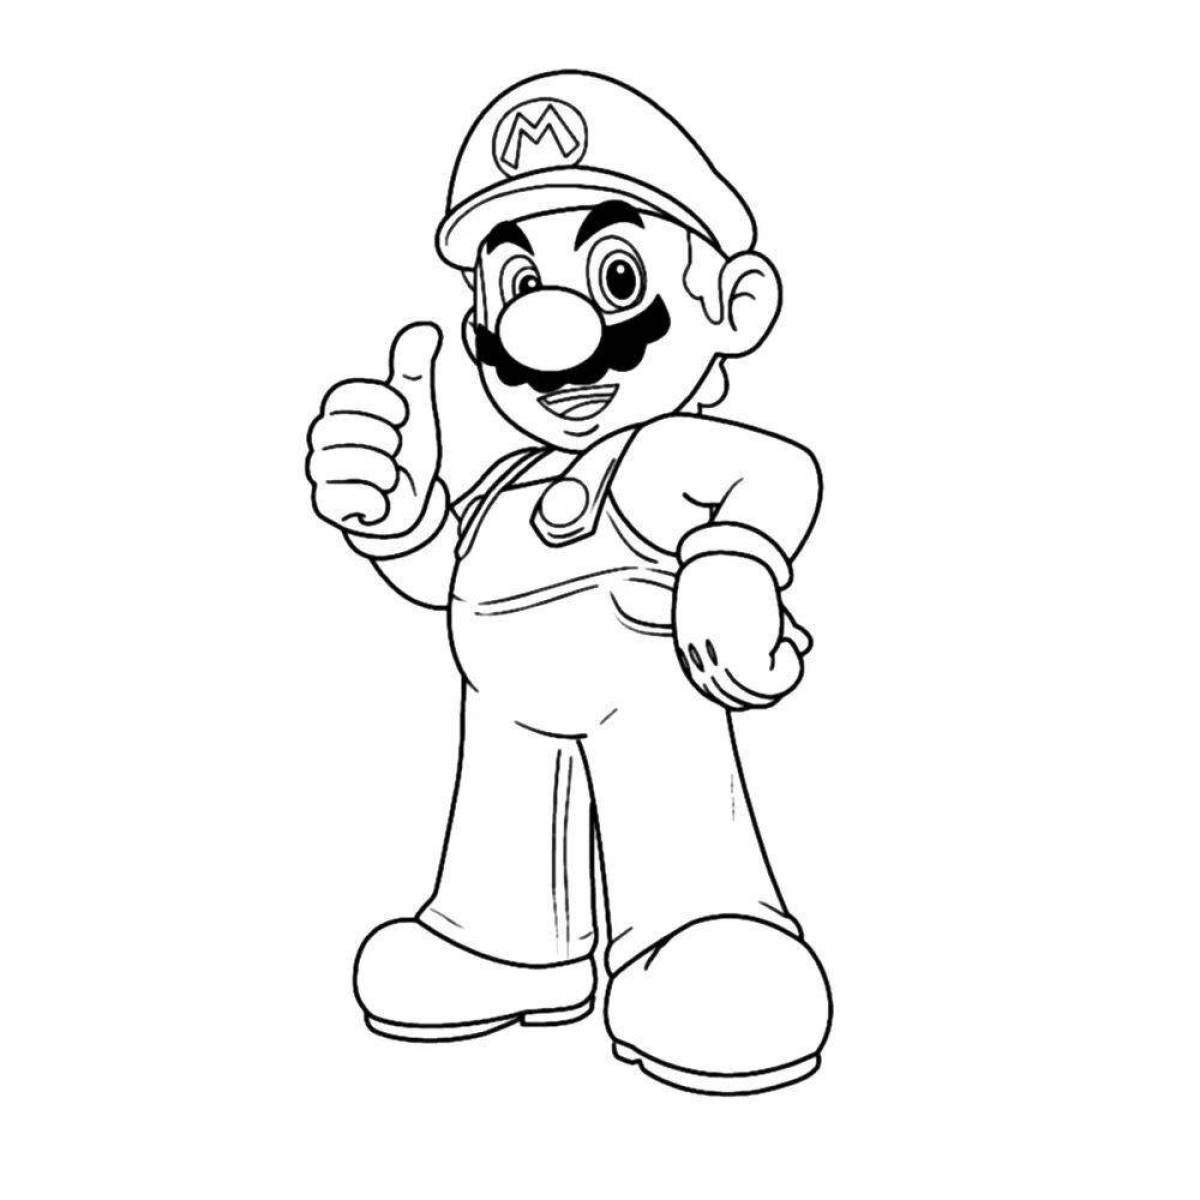 Mario and sonic coloring pages